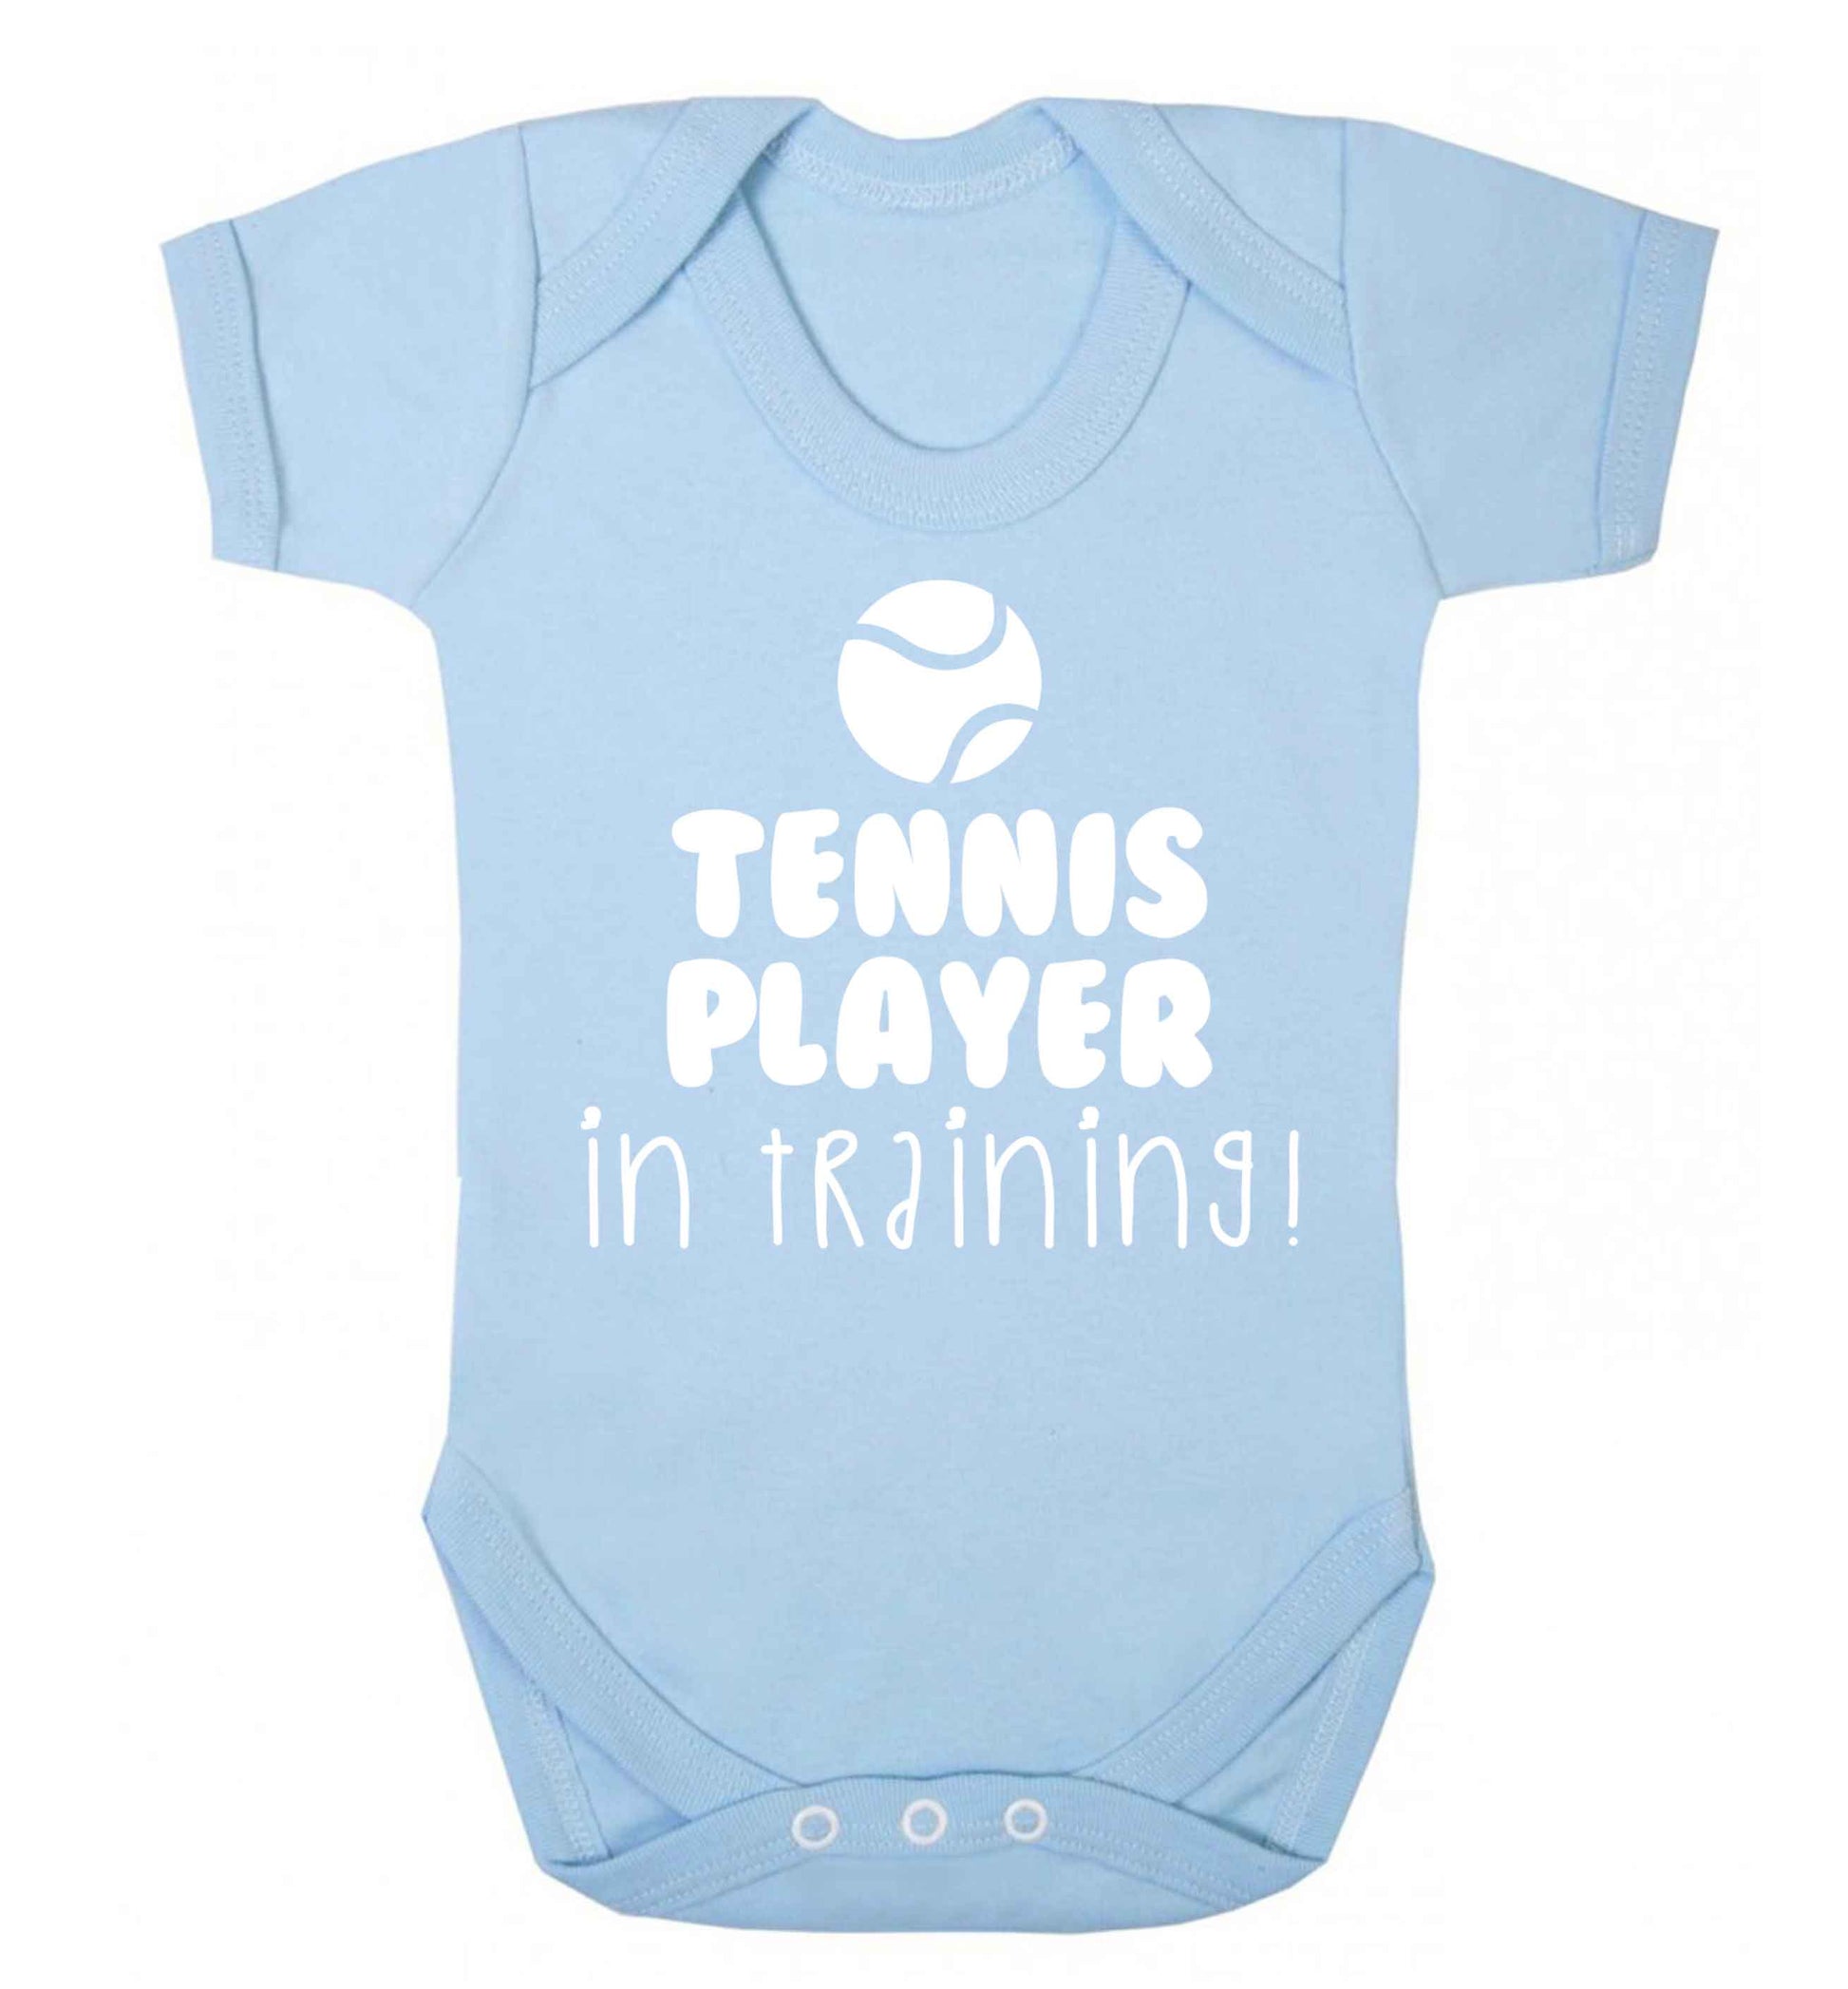 Tennis player in training Baby Vest pale blue 18-24 months